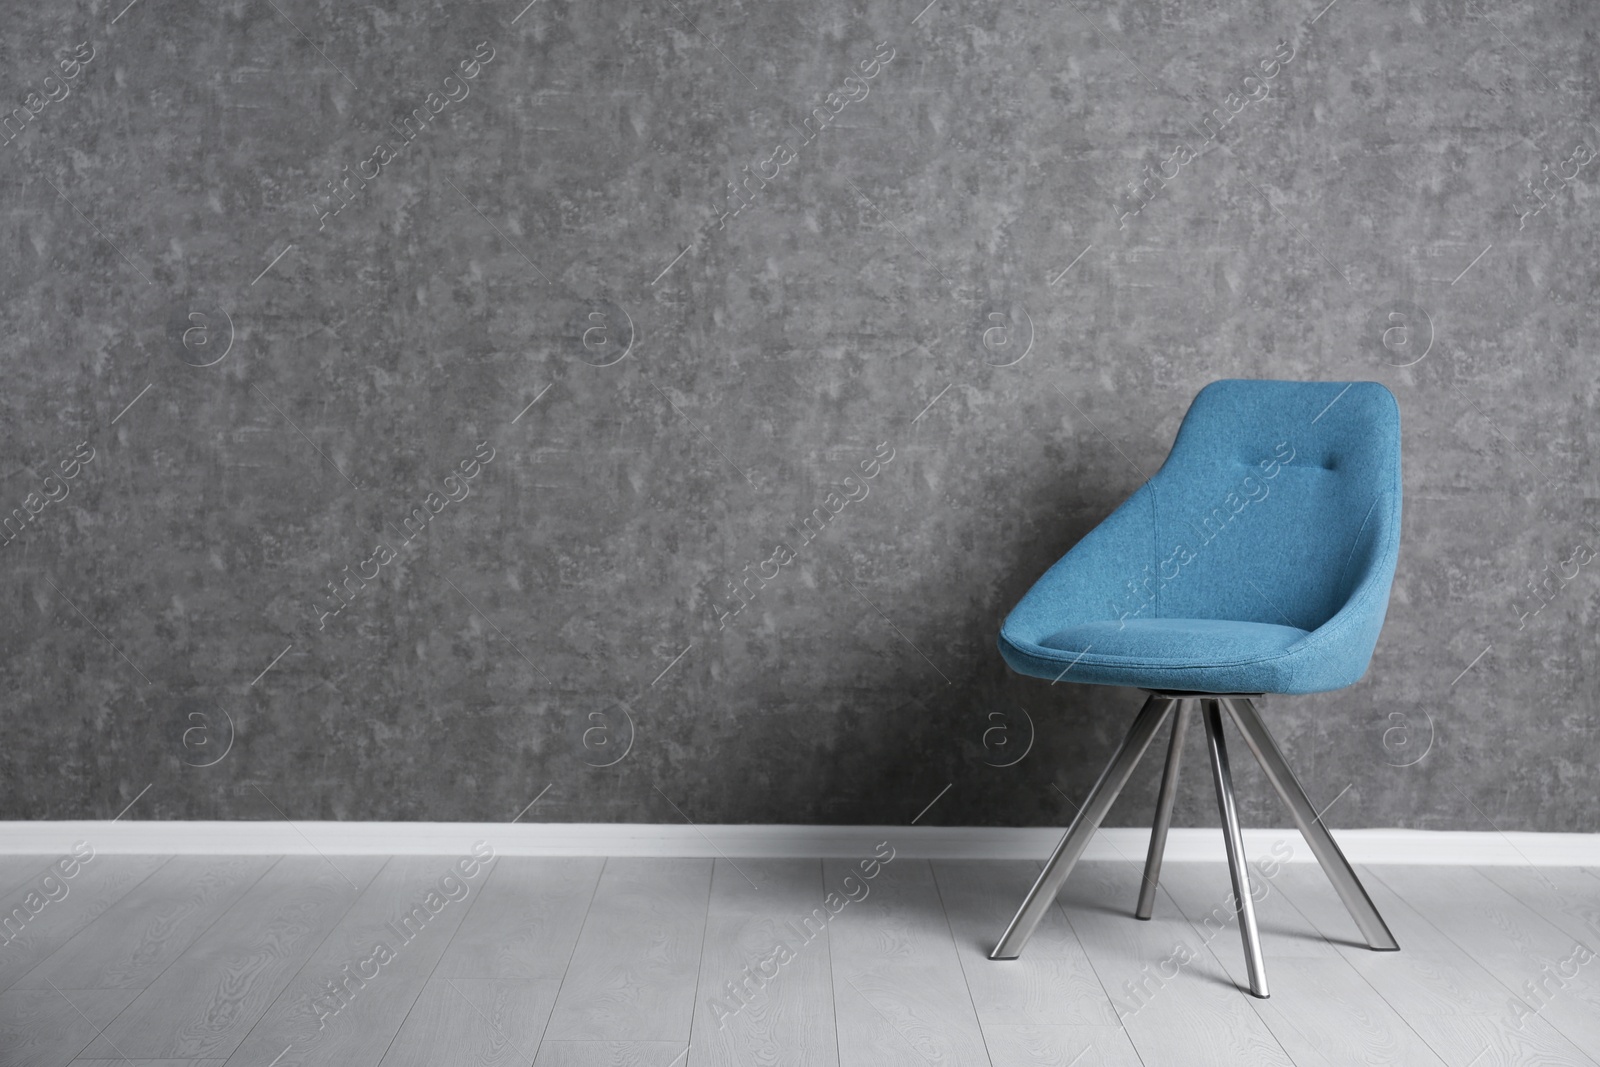 Photo of Blue modern chair for interior design on wooden floor at gray wall